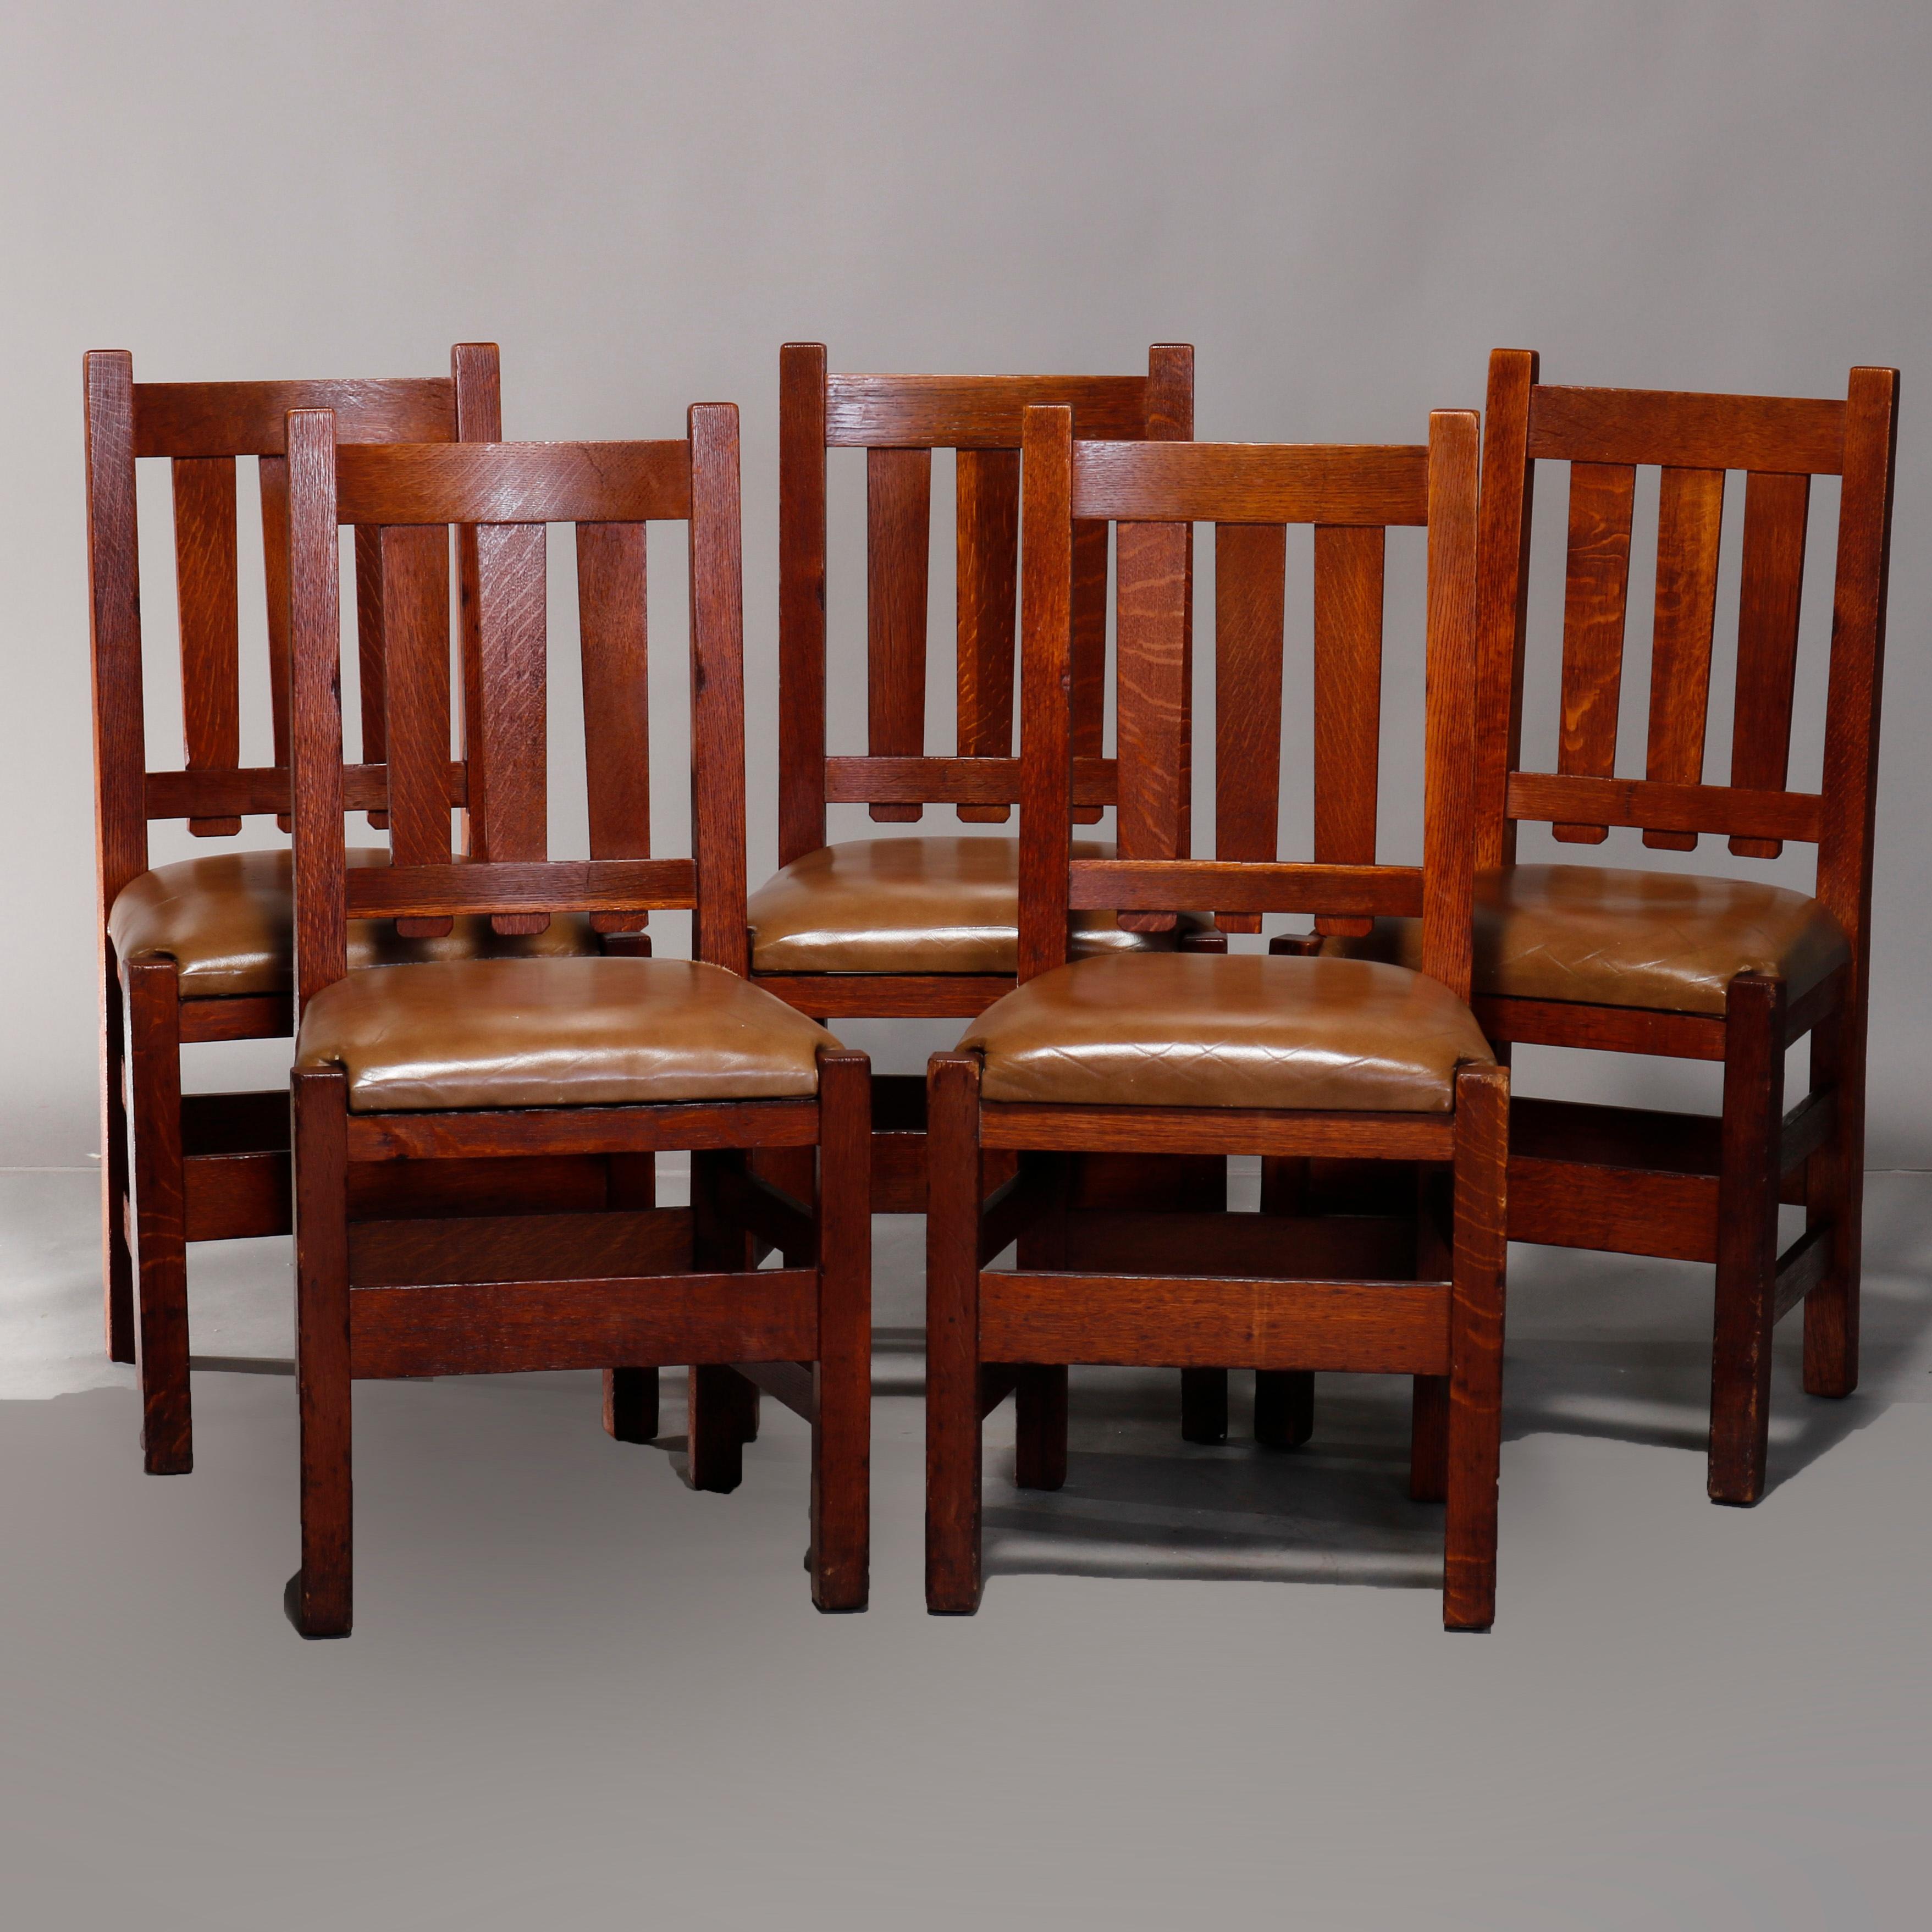 Five Antique Arts & Crafts Mission Oak and Leather Chairs attr Stickley Bros 1